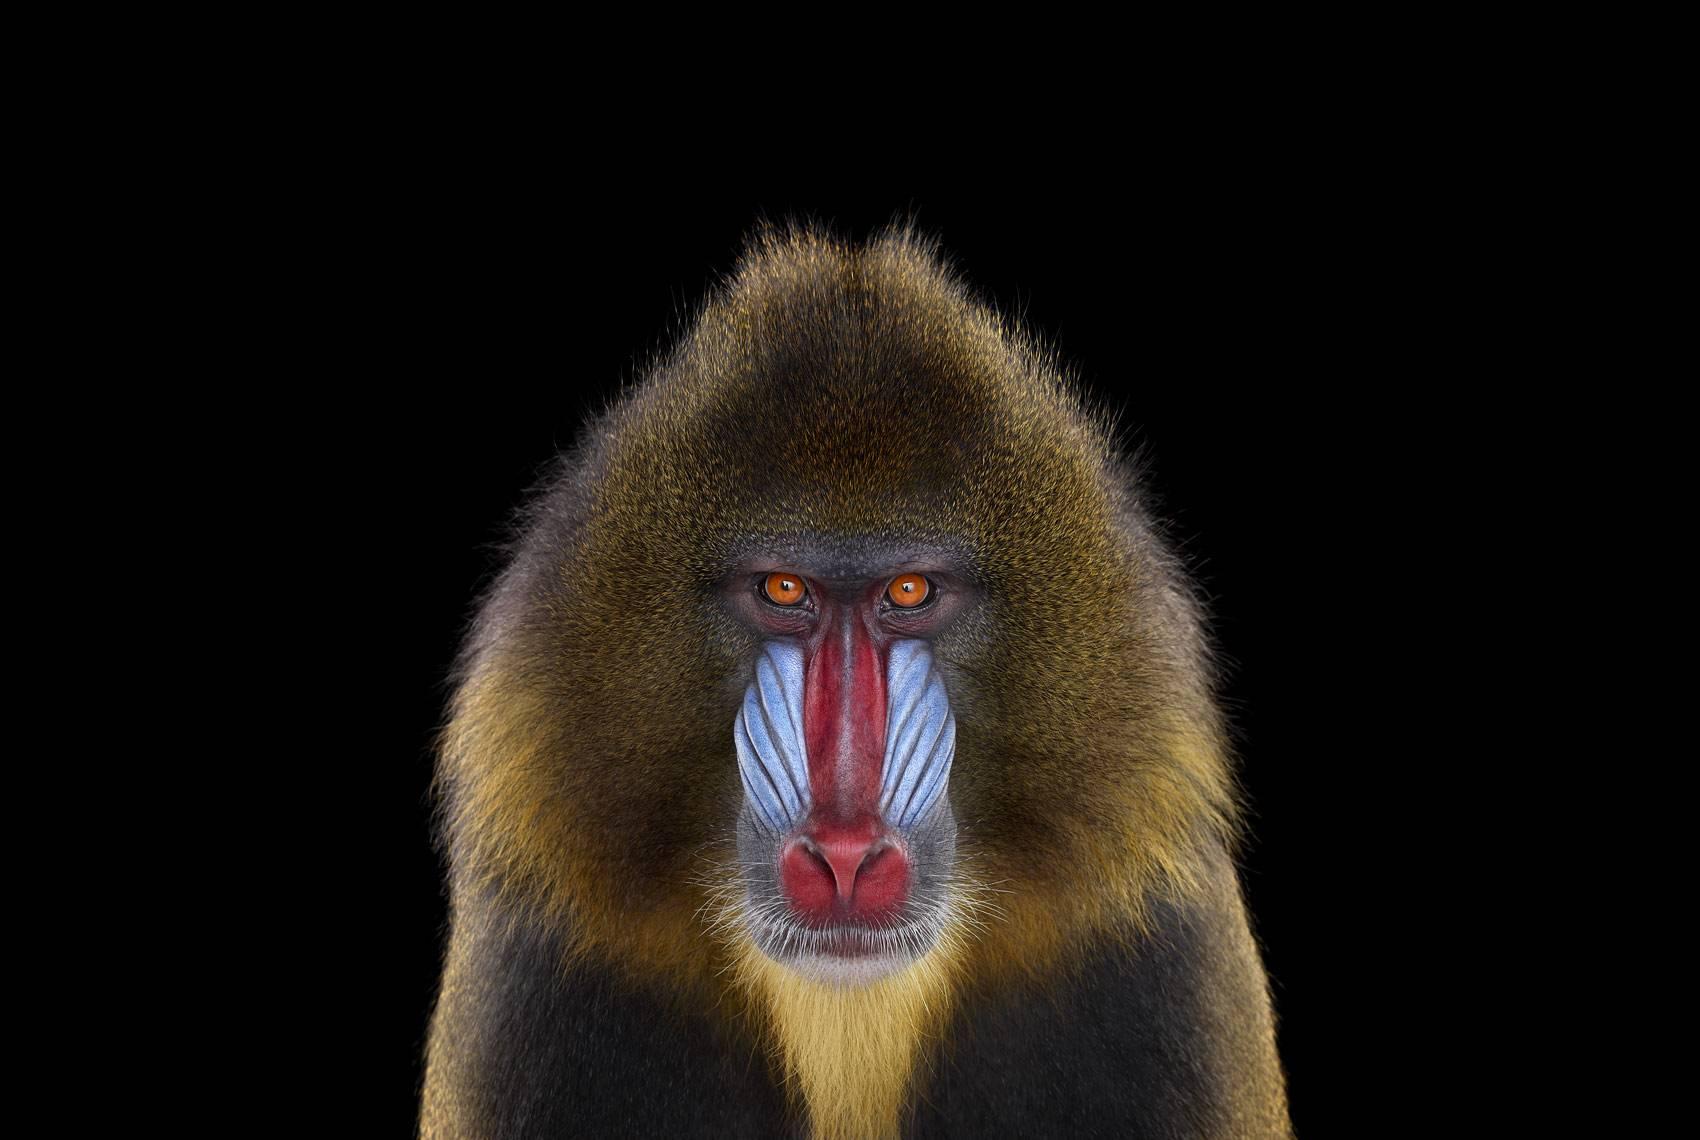 'Mandrill #1, Los Angeles, CA, 2014' is a limited-edition photograph by contemporary artist Brad Wilson from the ‘Affinity’ series which features studio portraits of wild animals. 

This photograph is sold unframed as a print only. It is available